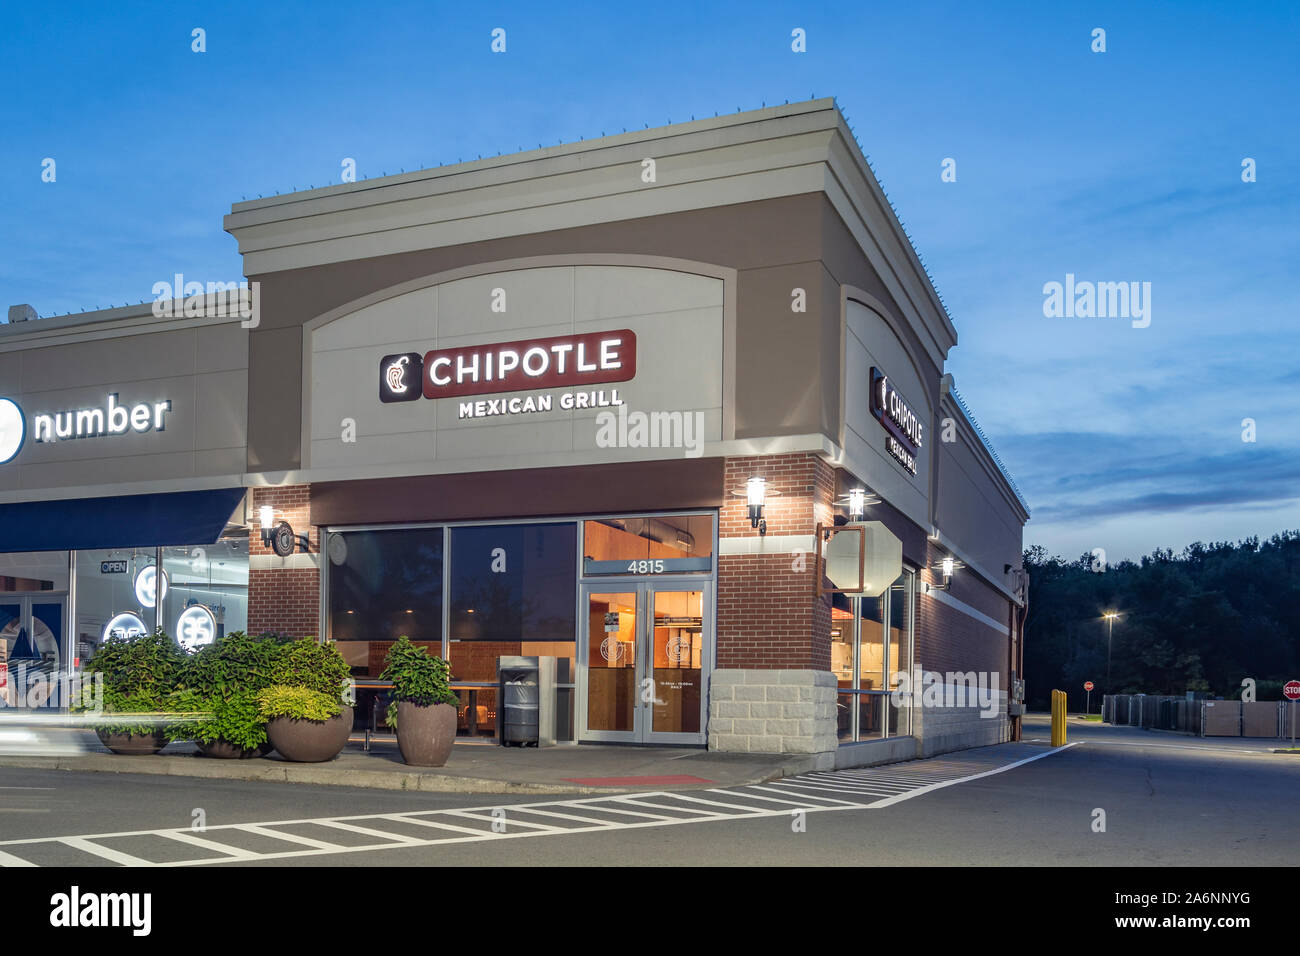 New Hartford, New York - Aug 18, 2019: Night View of Chipotle Restaurant, Chipotle is an American Fast Food Brand Specialized in Grill & Mexican Food. Stock Photo